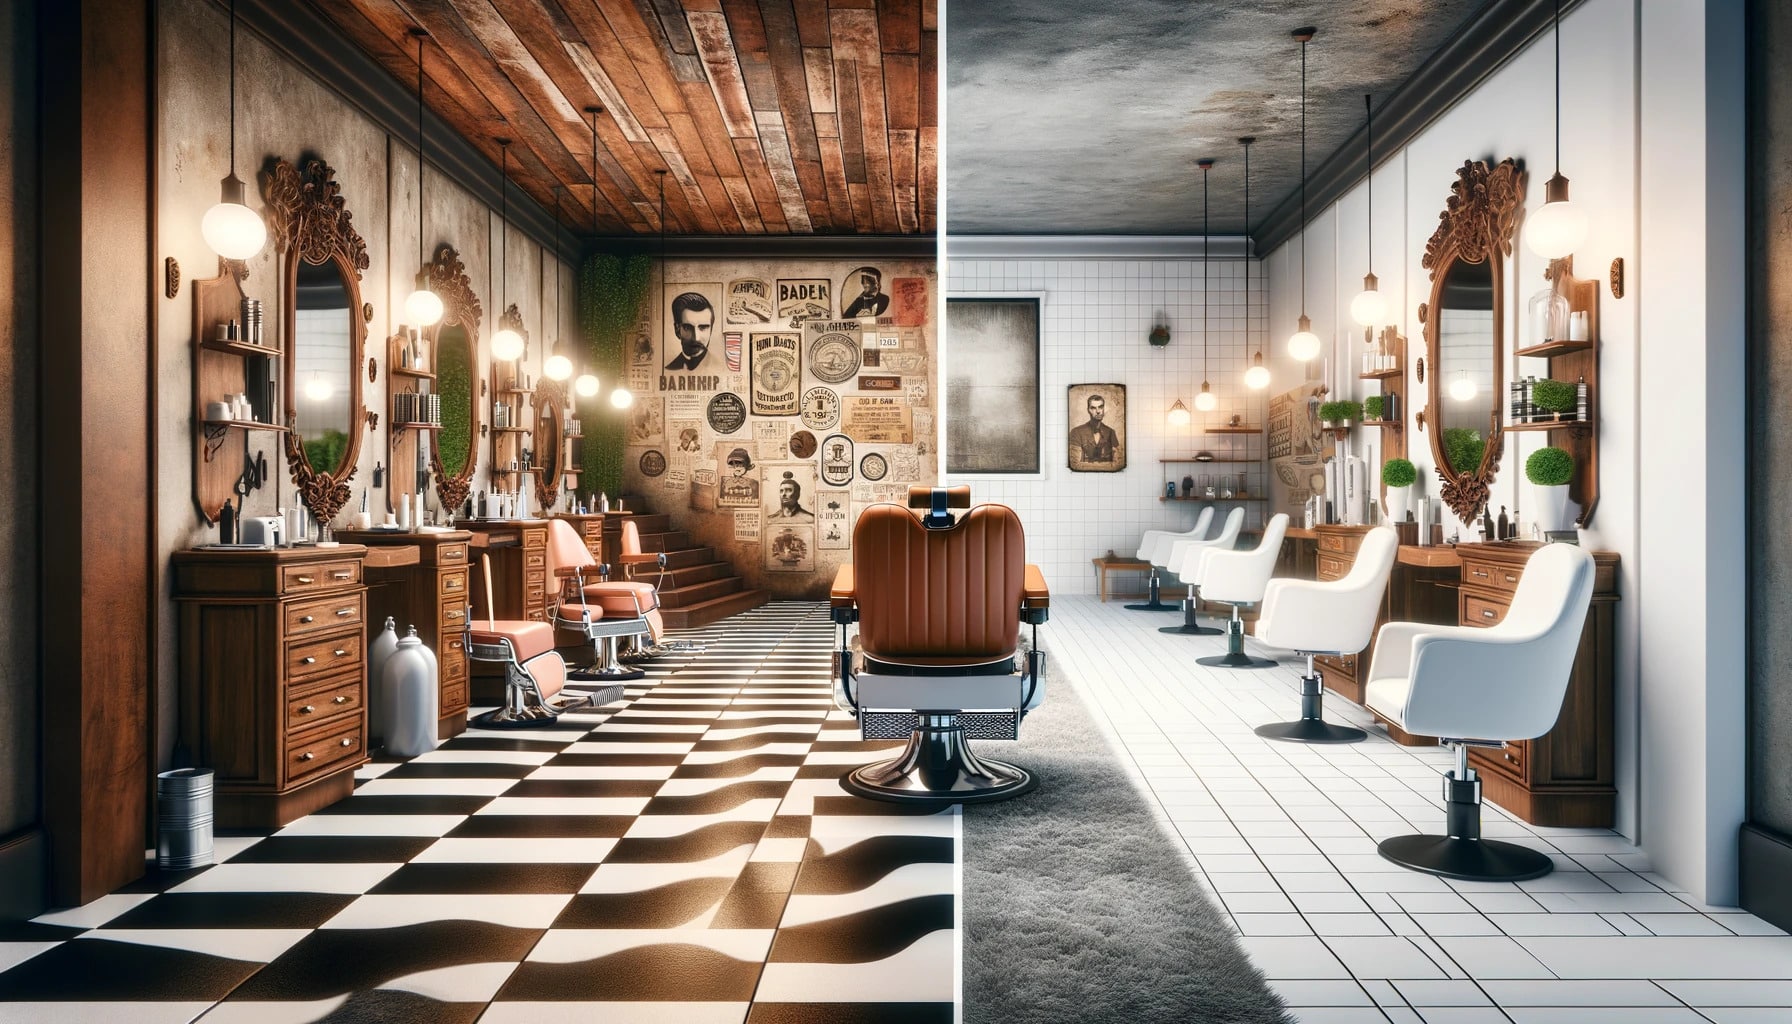 barber shop vs hair salon which is better to get haircut?